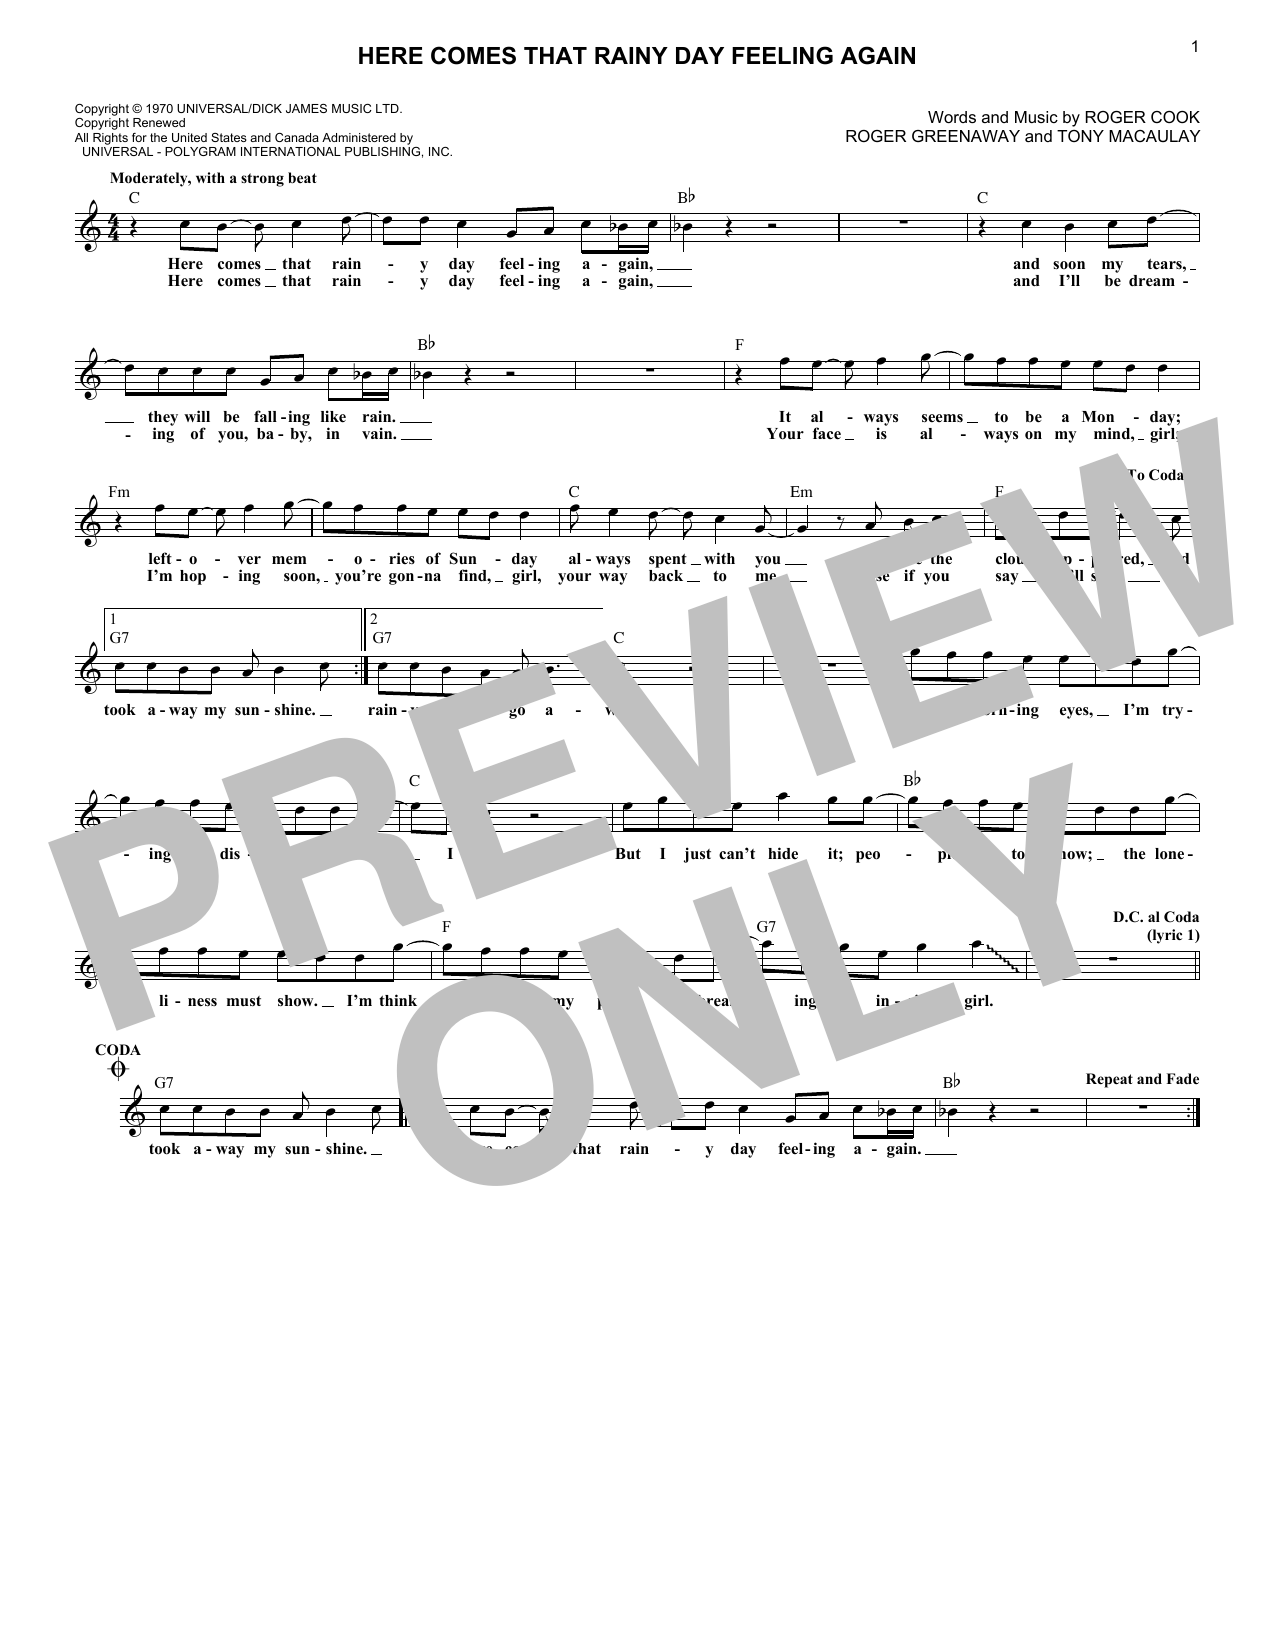 Download Roger Cook Here Comes That Rainy Day Feeling Again Sheet Music